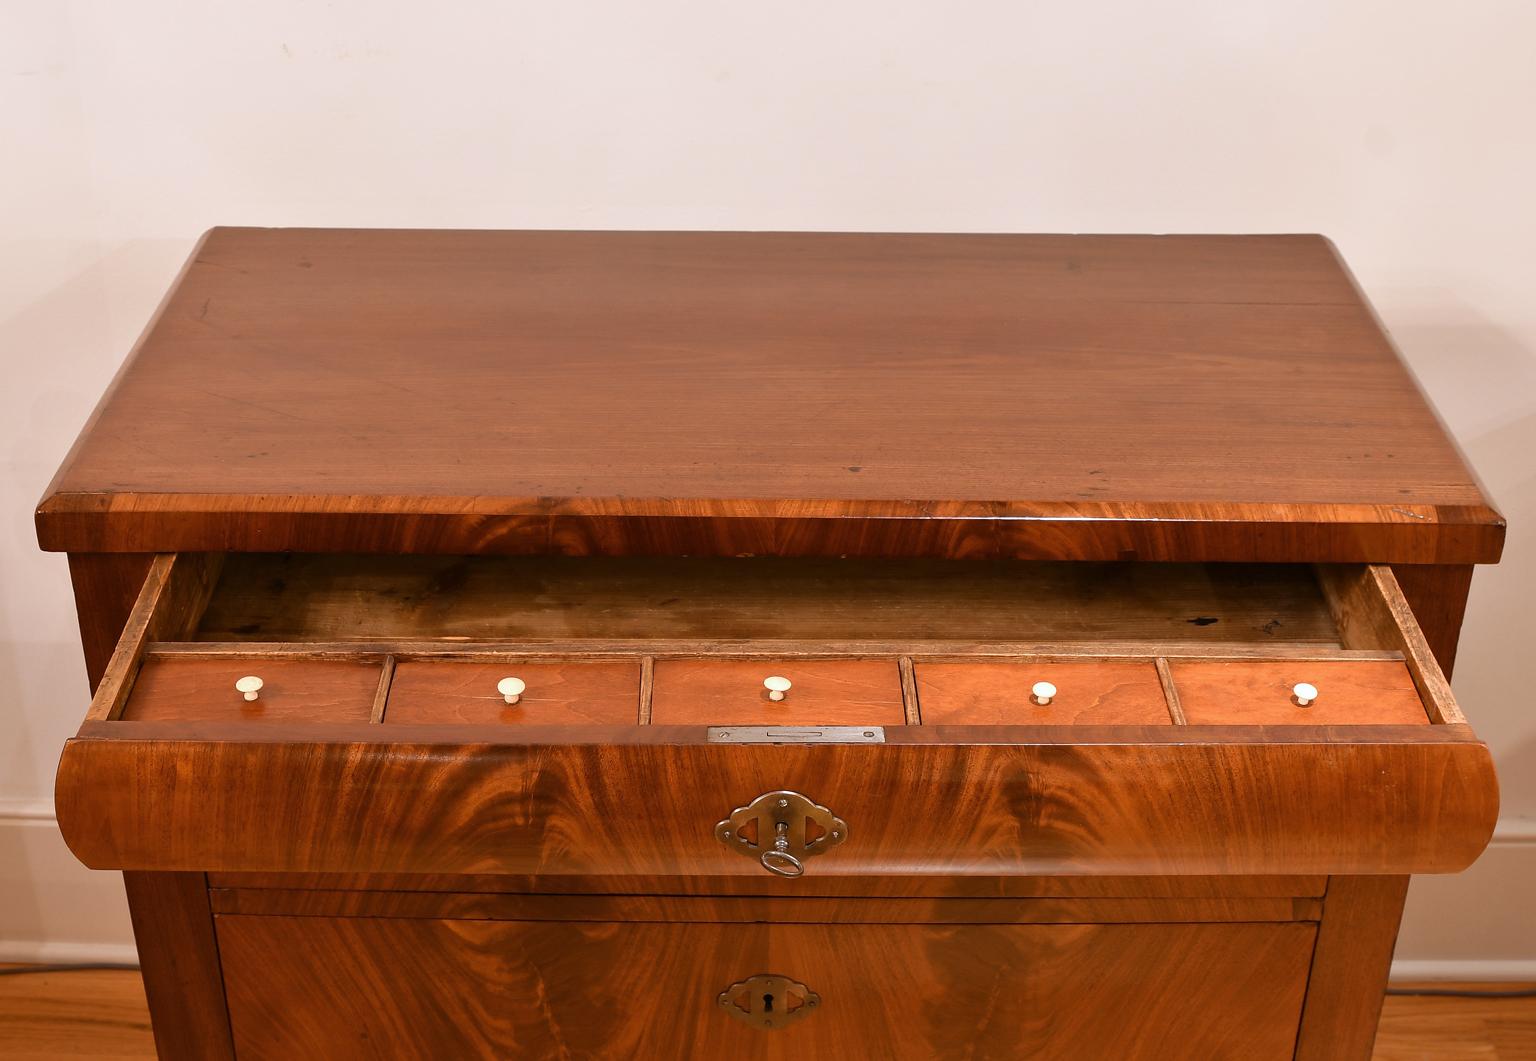 Antique Empire/ Biedermeier Chest of Drawers in West Indies Mahogany, c. 1825 For Sale 3